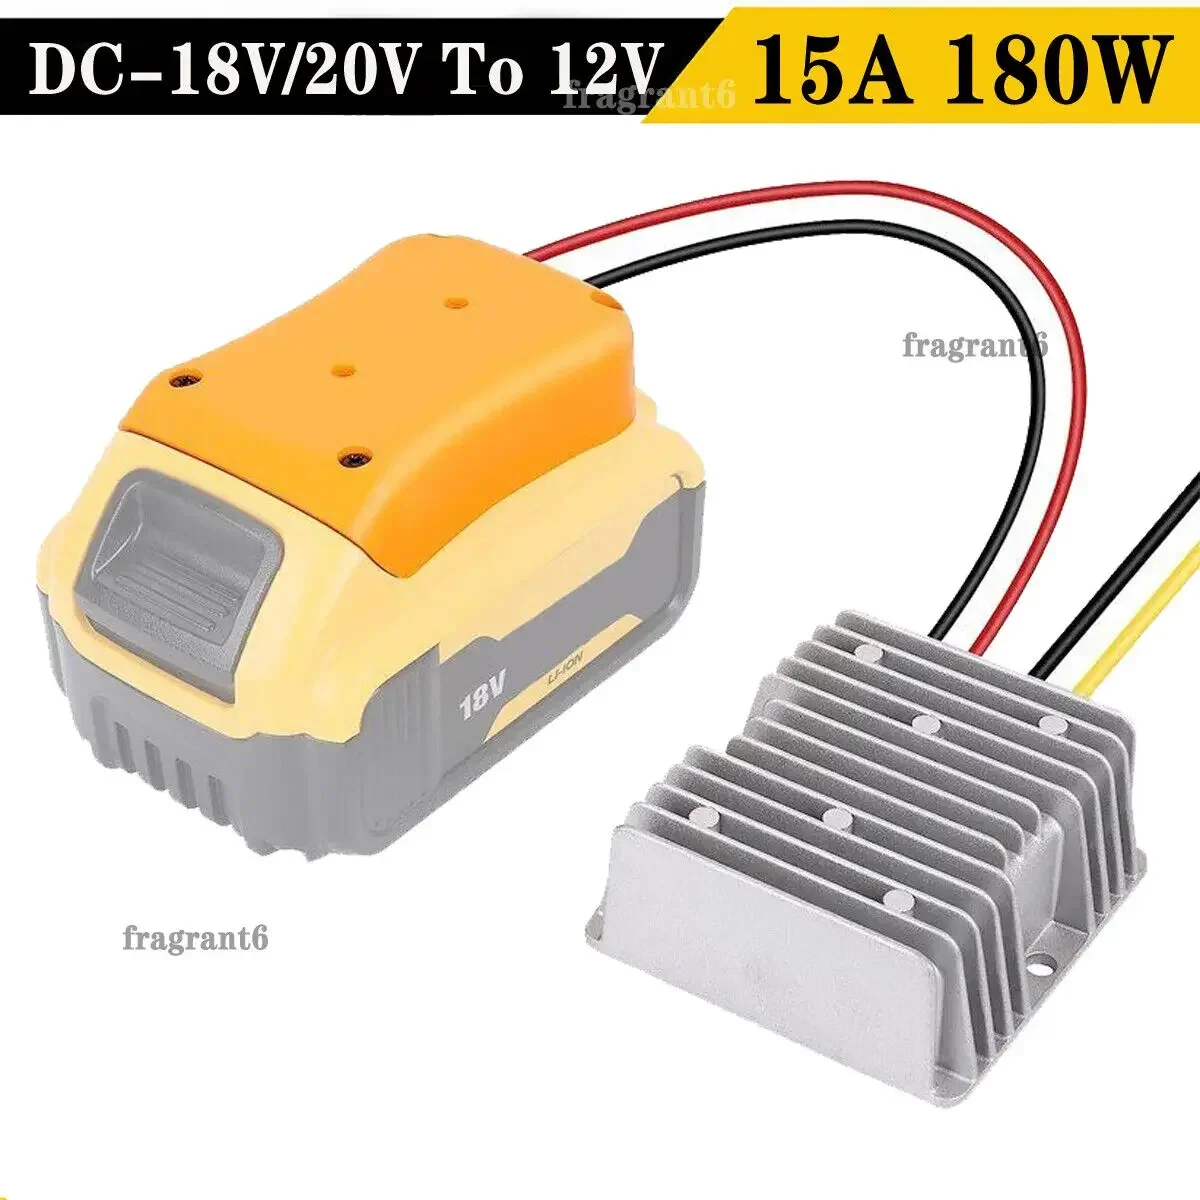 Step Down Converter 20V To 12V Adapter for Dewalt 20V Li-ion Battery 15A 180W Adapter Automatic Buck Boost Converter Regulator automatic water timer outdoor garden irrigation controller 1 outlet programmable hose faucet timer garden automatic watering device without battery green